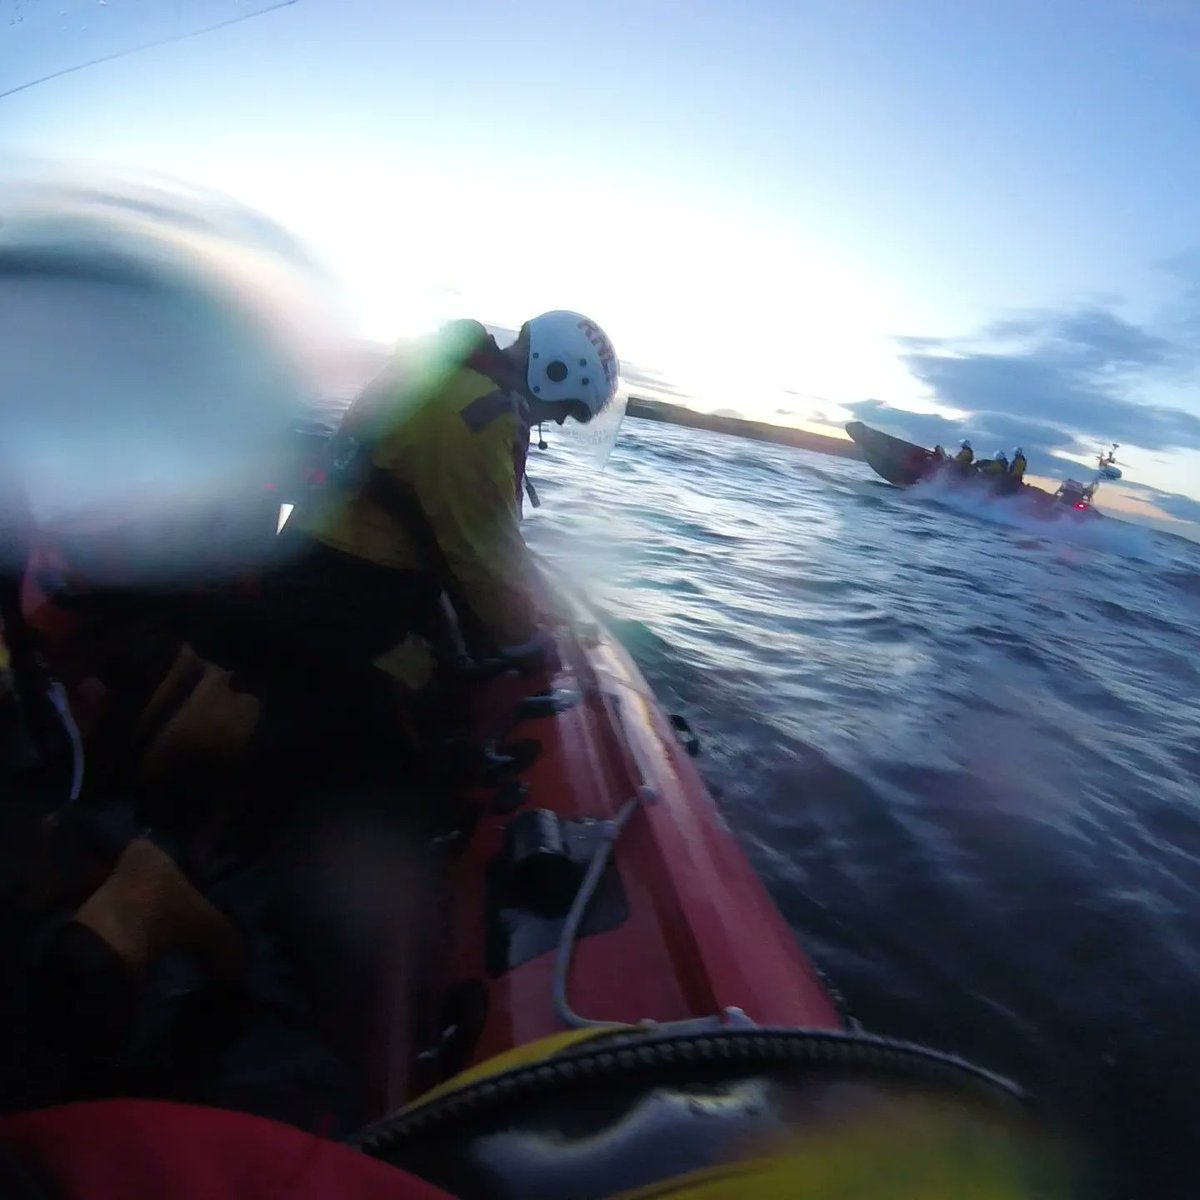 Tonight we got to brush up on our towing procedures with @CullercoatsB811 We took in turns towing the others boat to familiarise ourselves with how it works in practice, always great fun working with our partners up the coast. We're also looking for crew! volunteering.rnli.org/vacancy/alb-an…